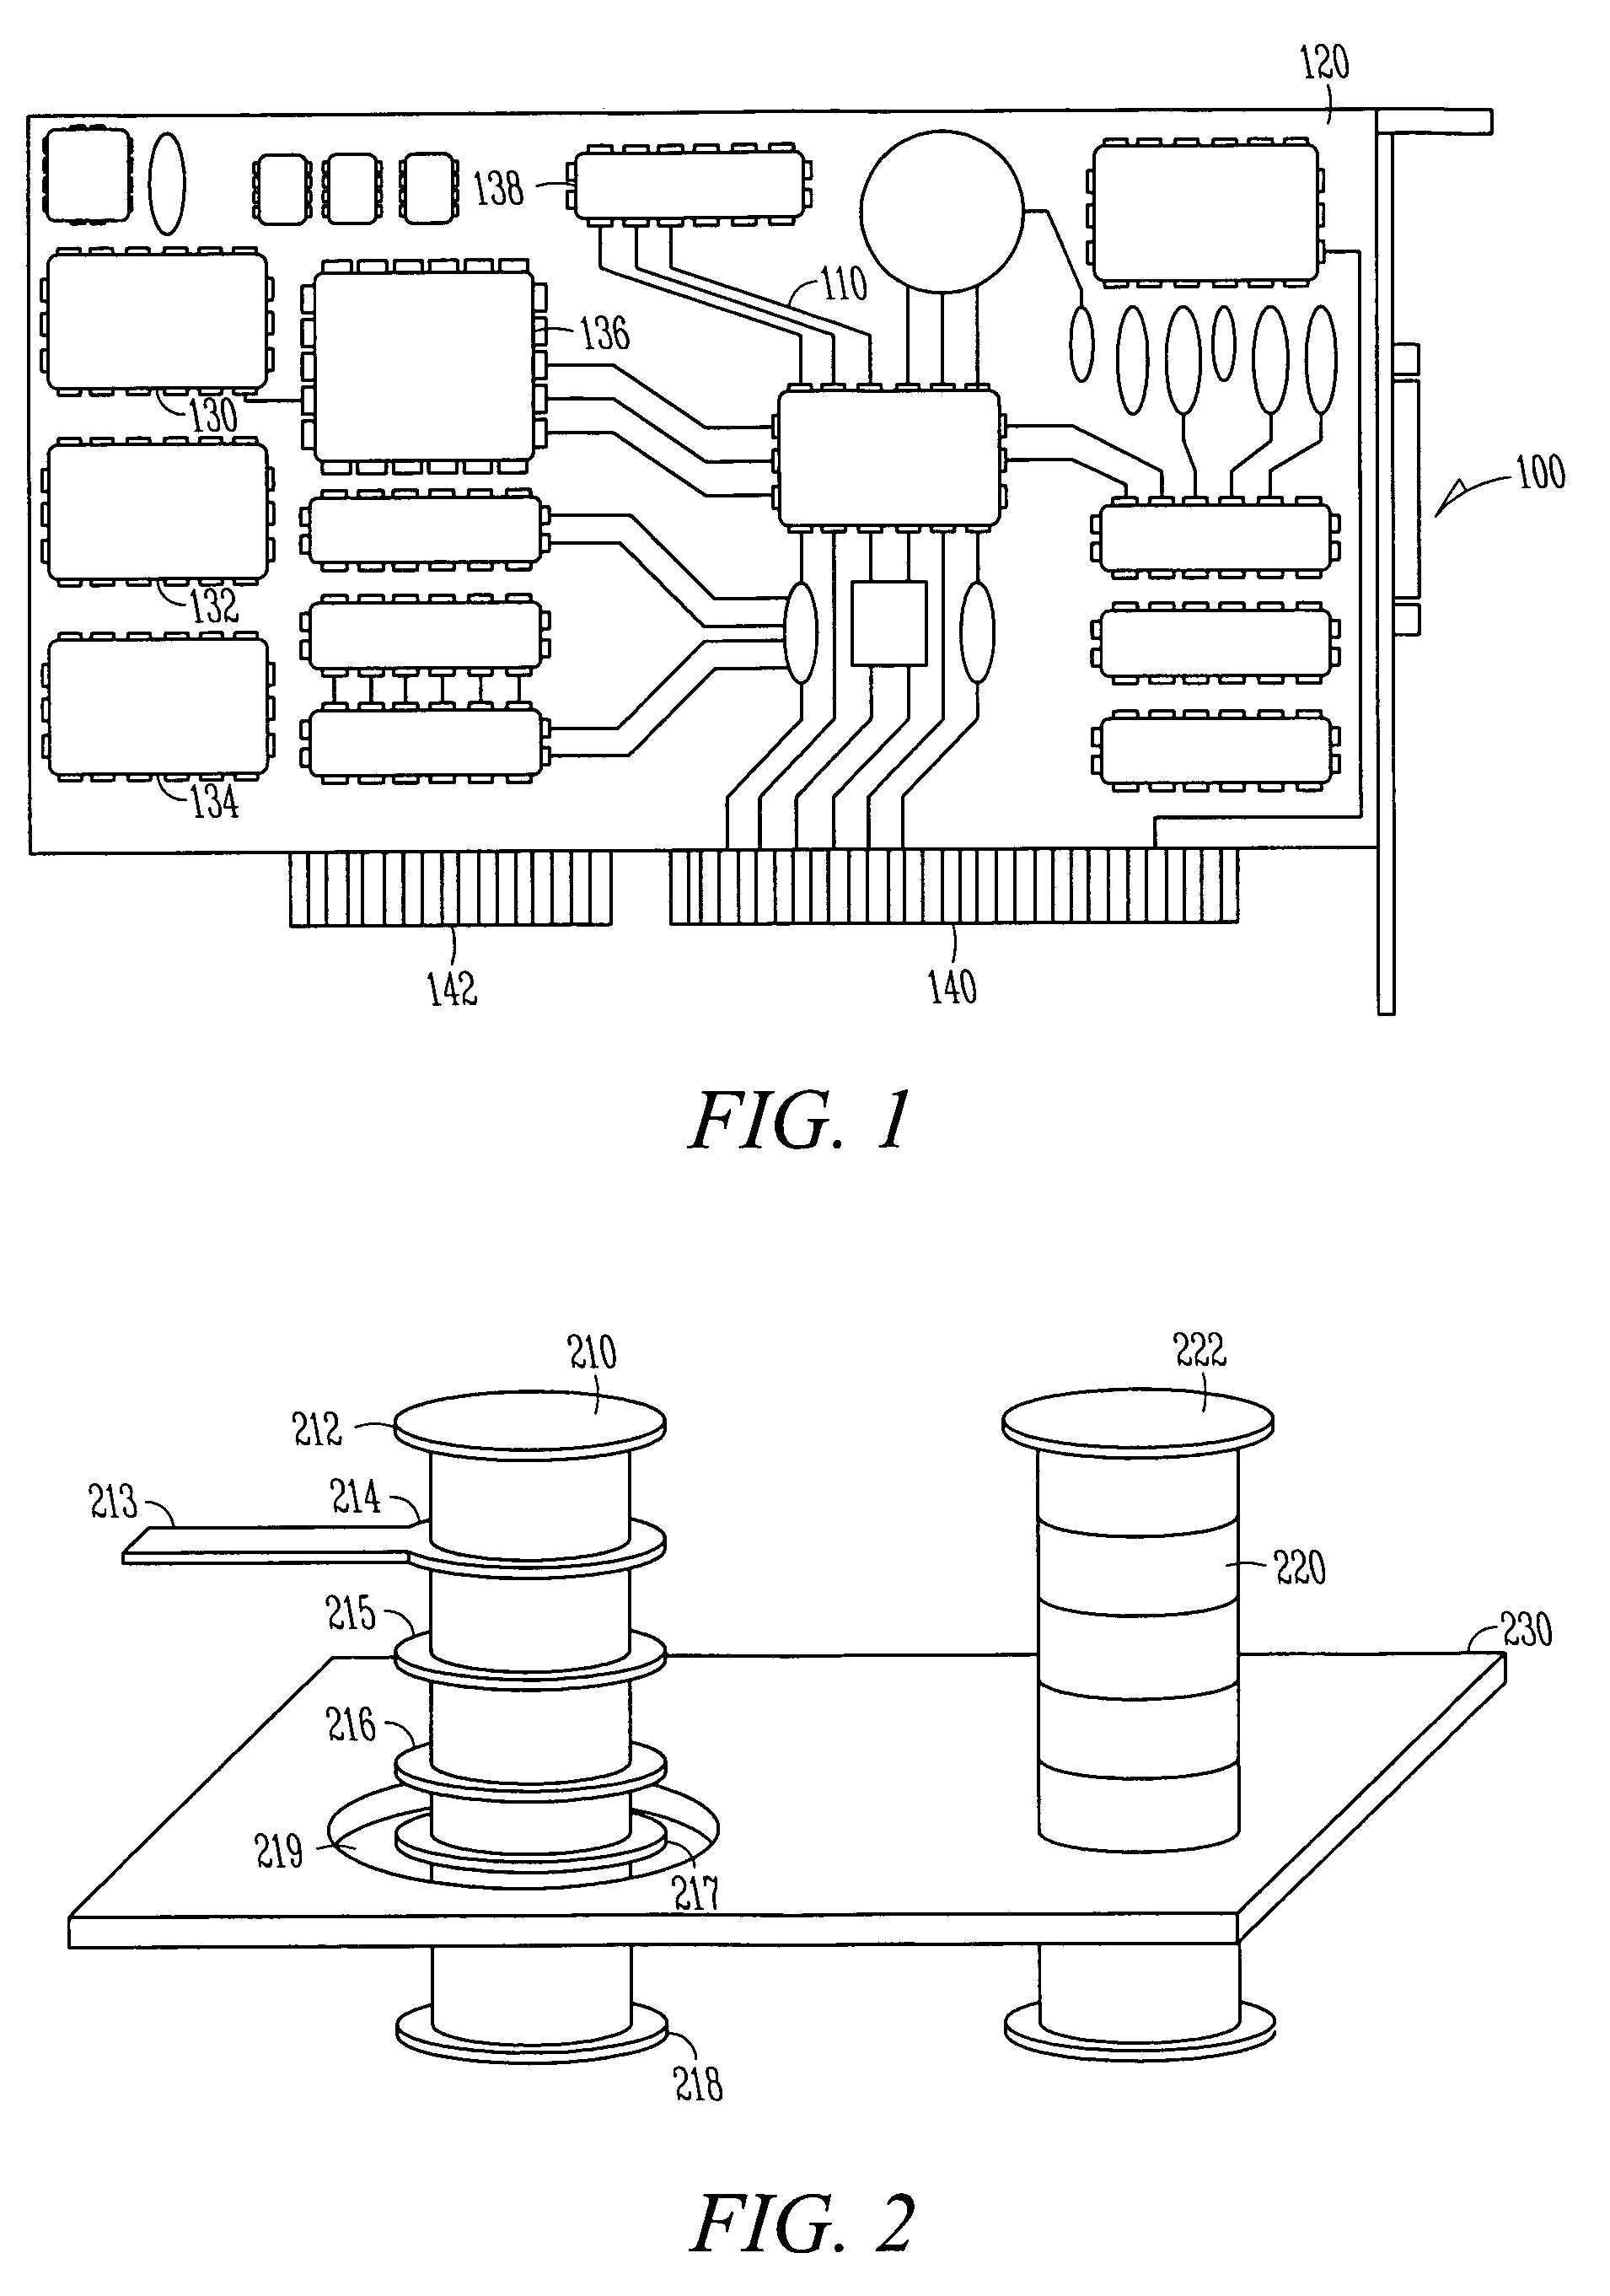 Apparatus for providing an integrated printed circuit board registration coupon